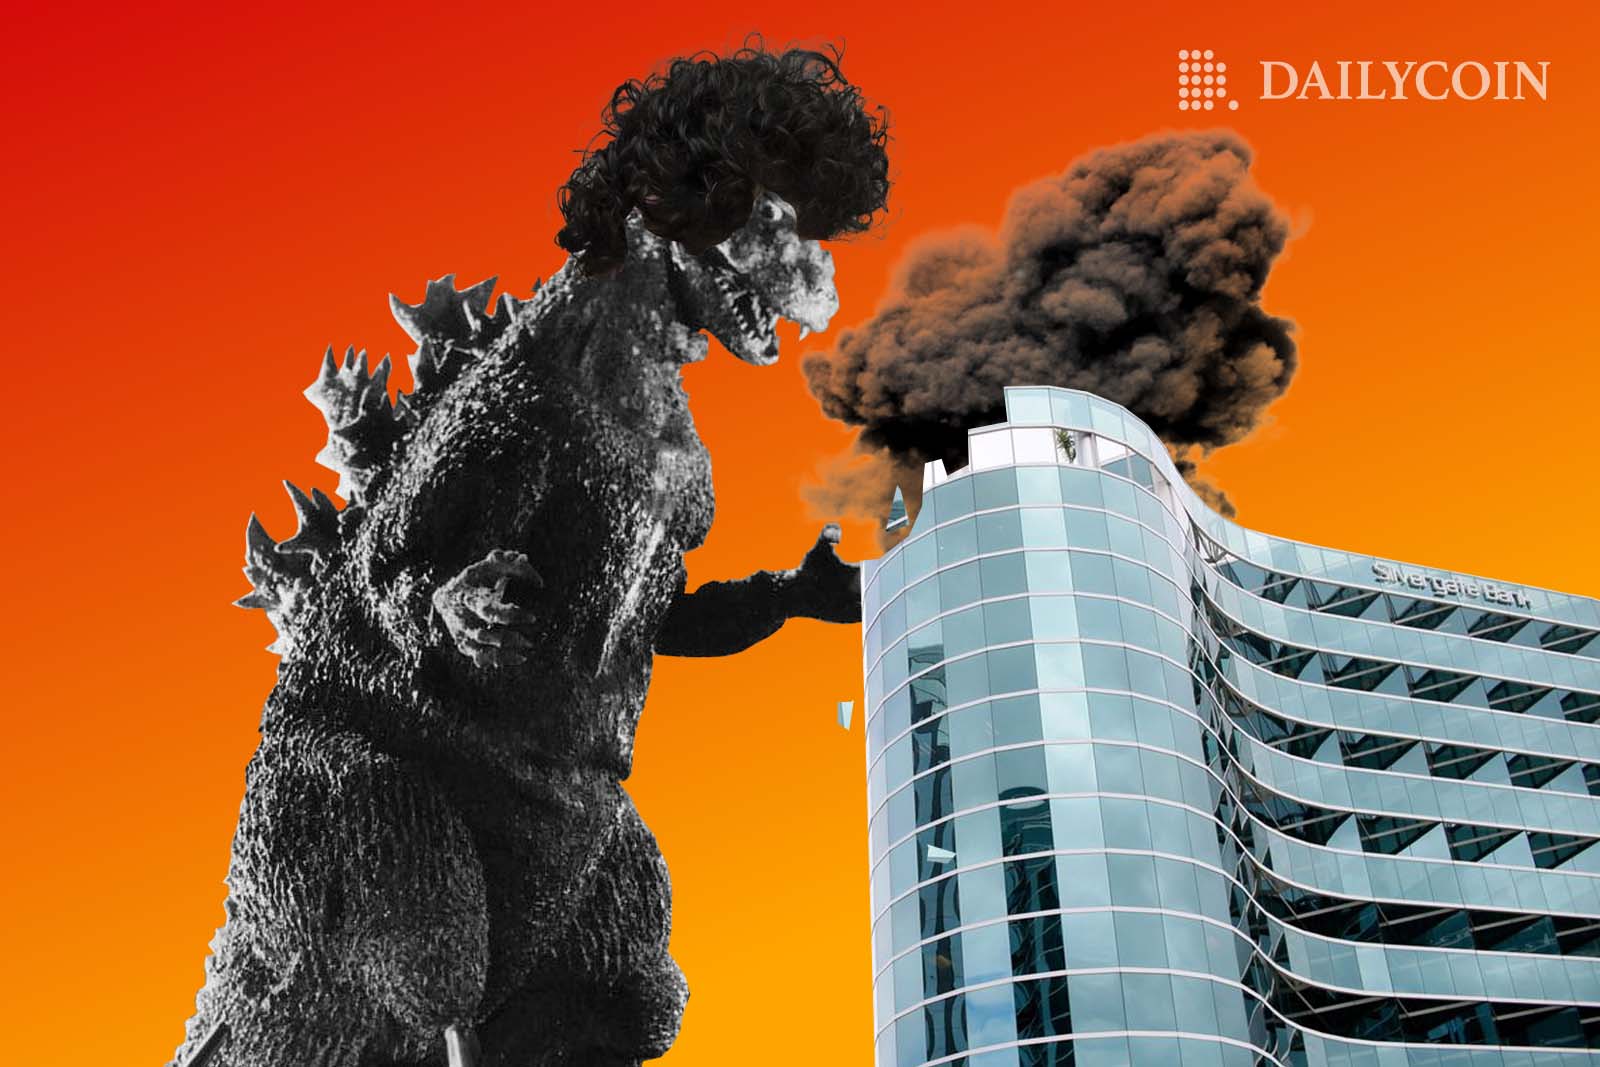 A godzilla with human hair in front of a bank